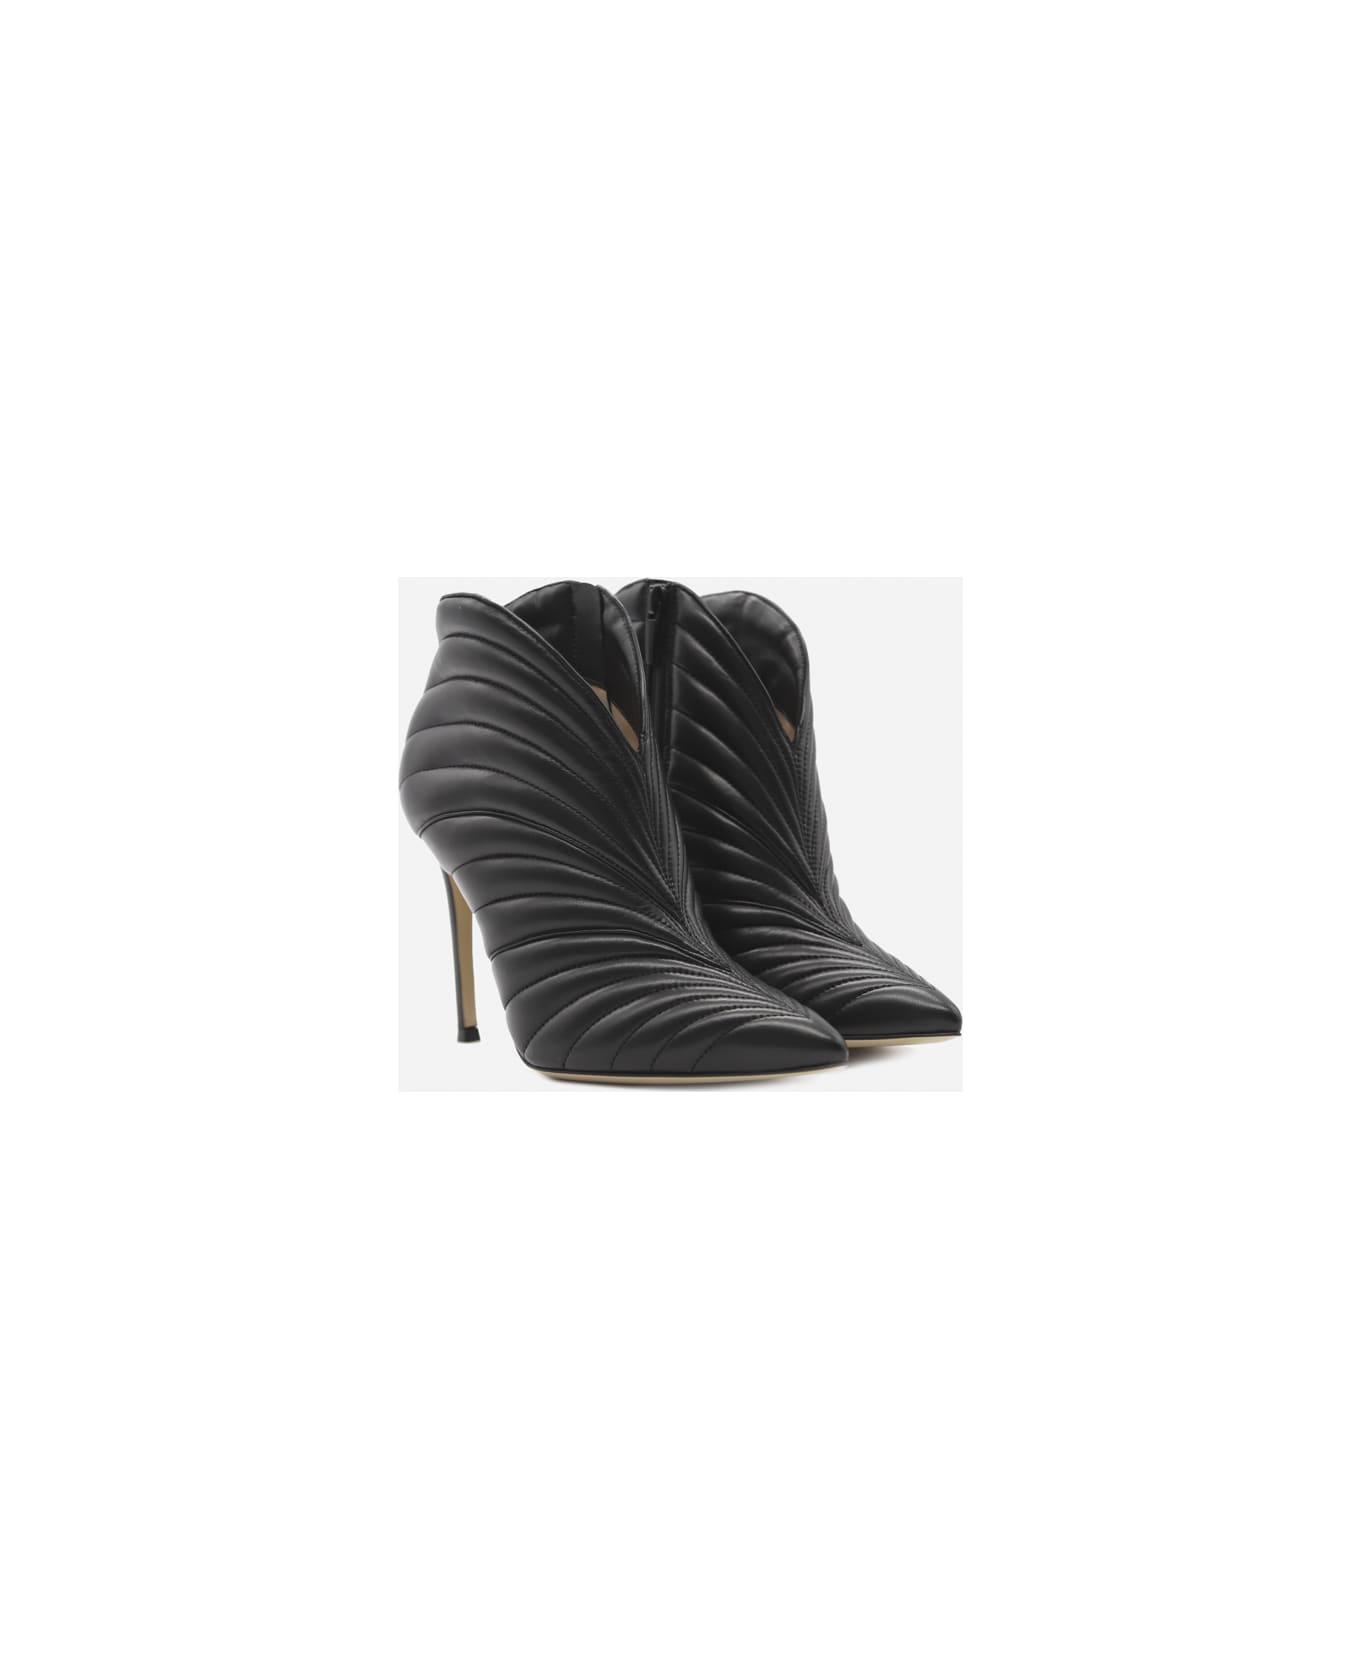 Gianvito Rossi Eiko Ankle Boots In Matelassé Effect Leather - Black ハイヒール